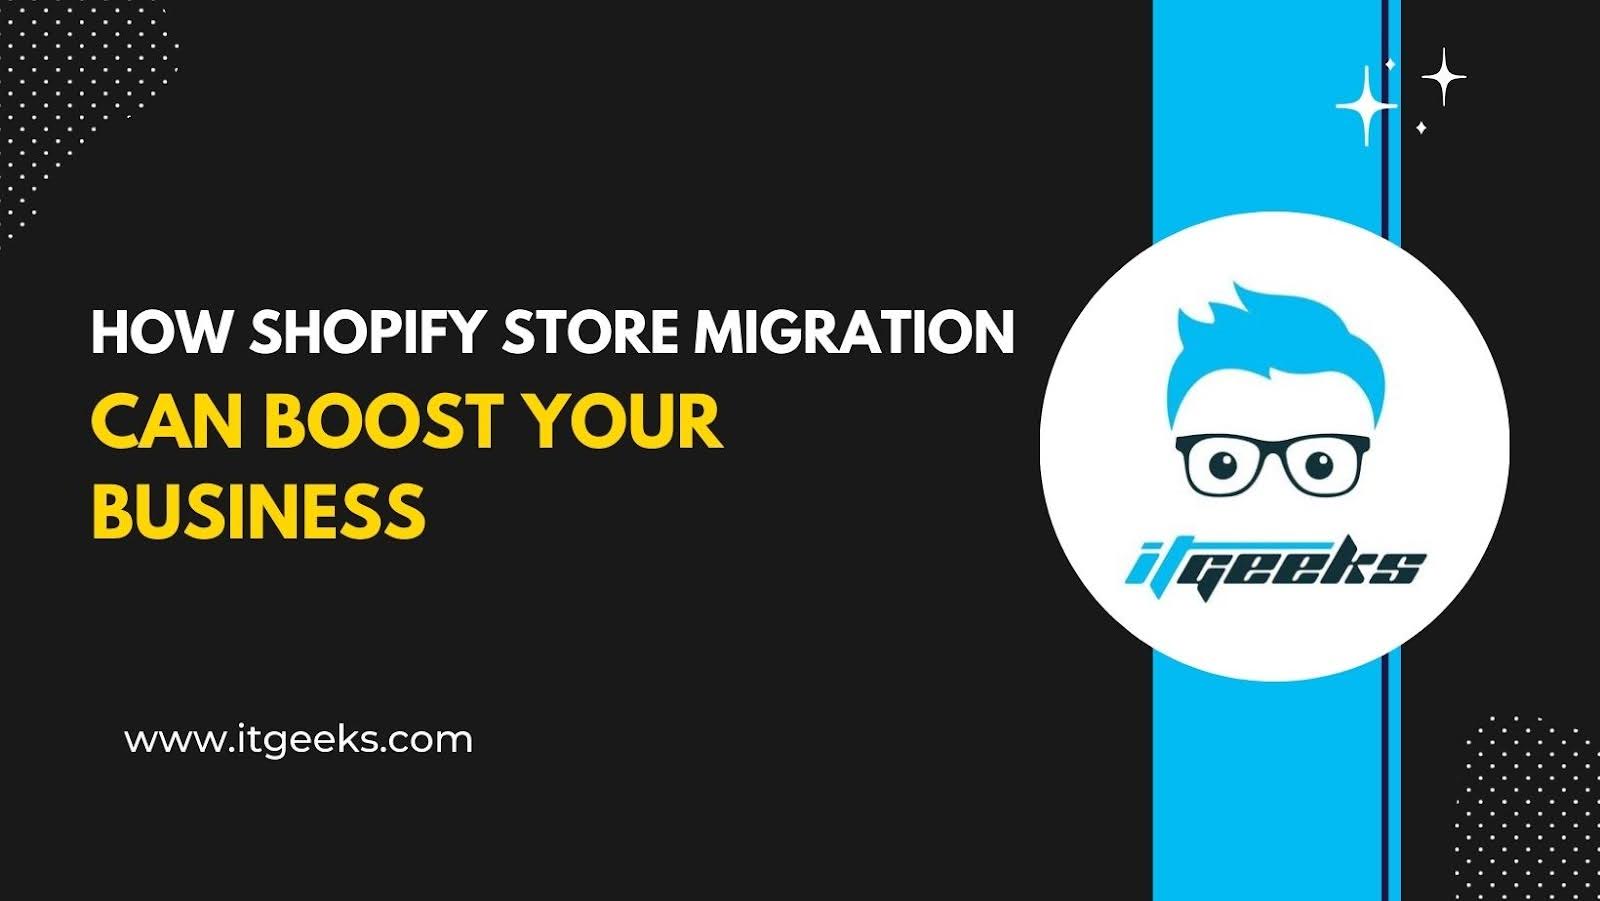 How Shopify Store Migration Can Boost Your Business